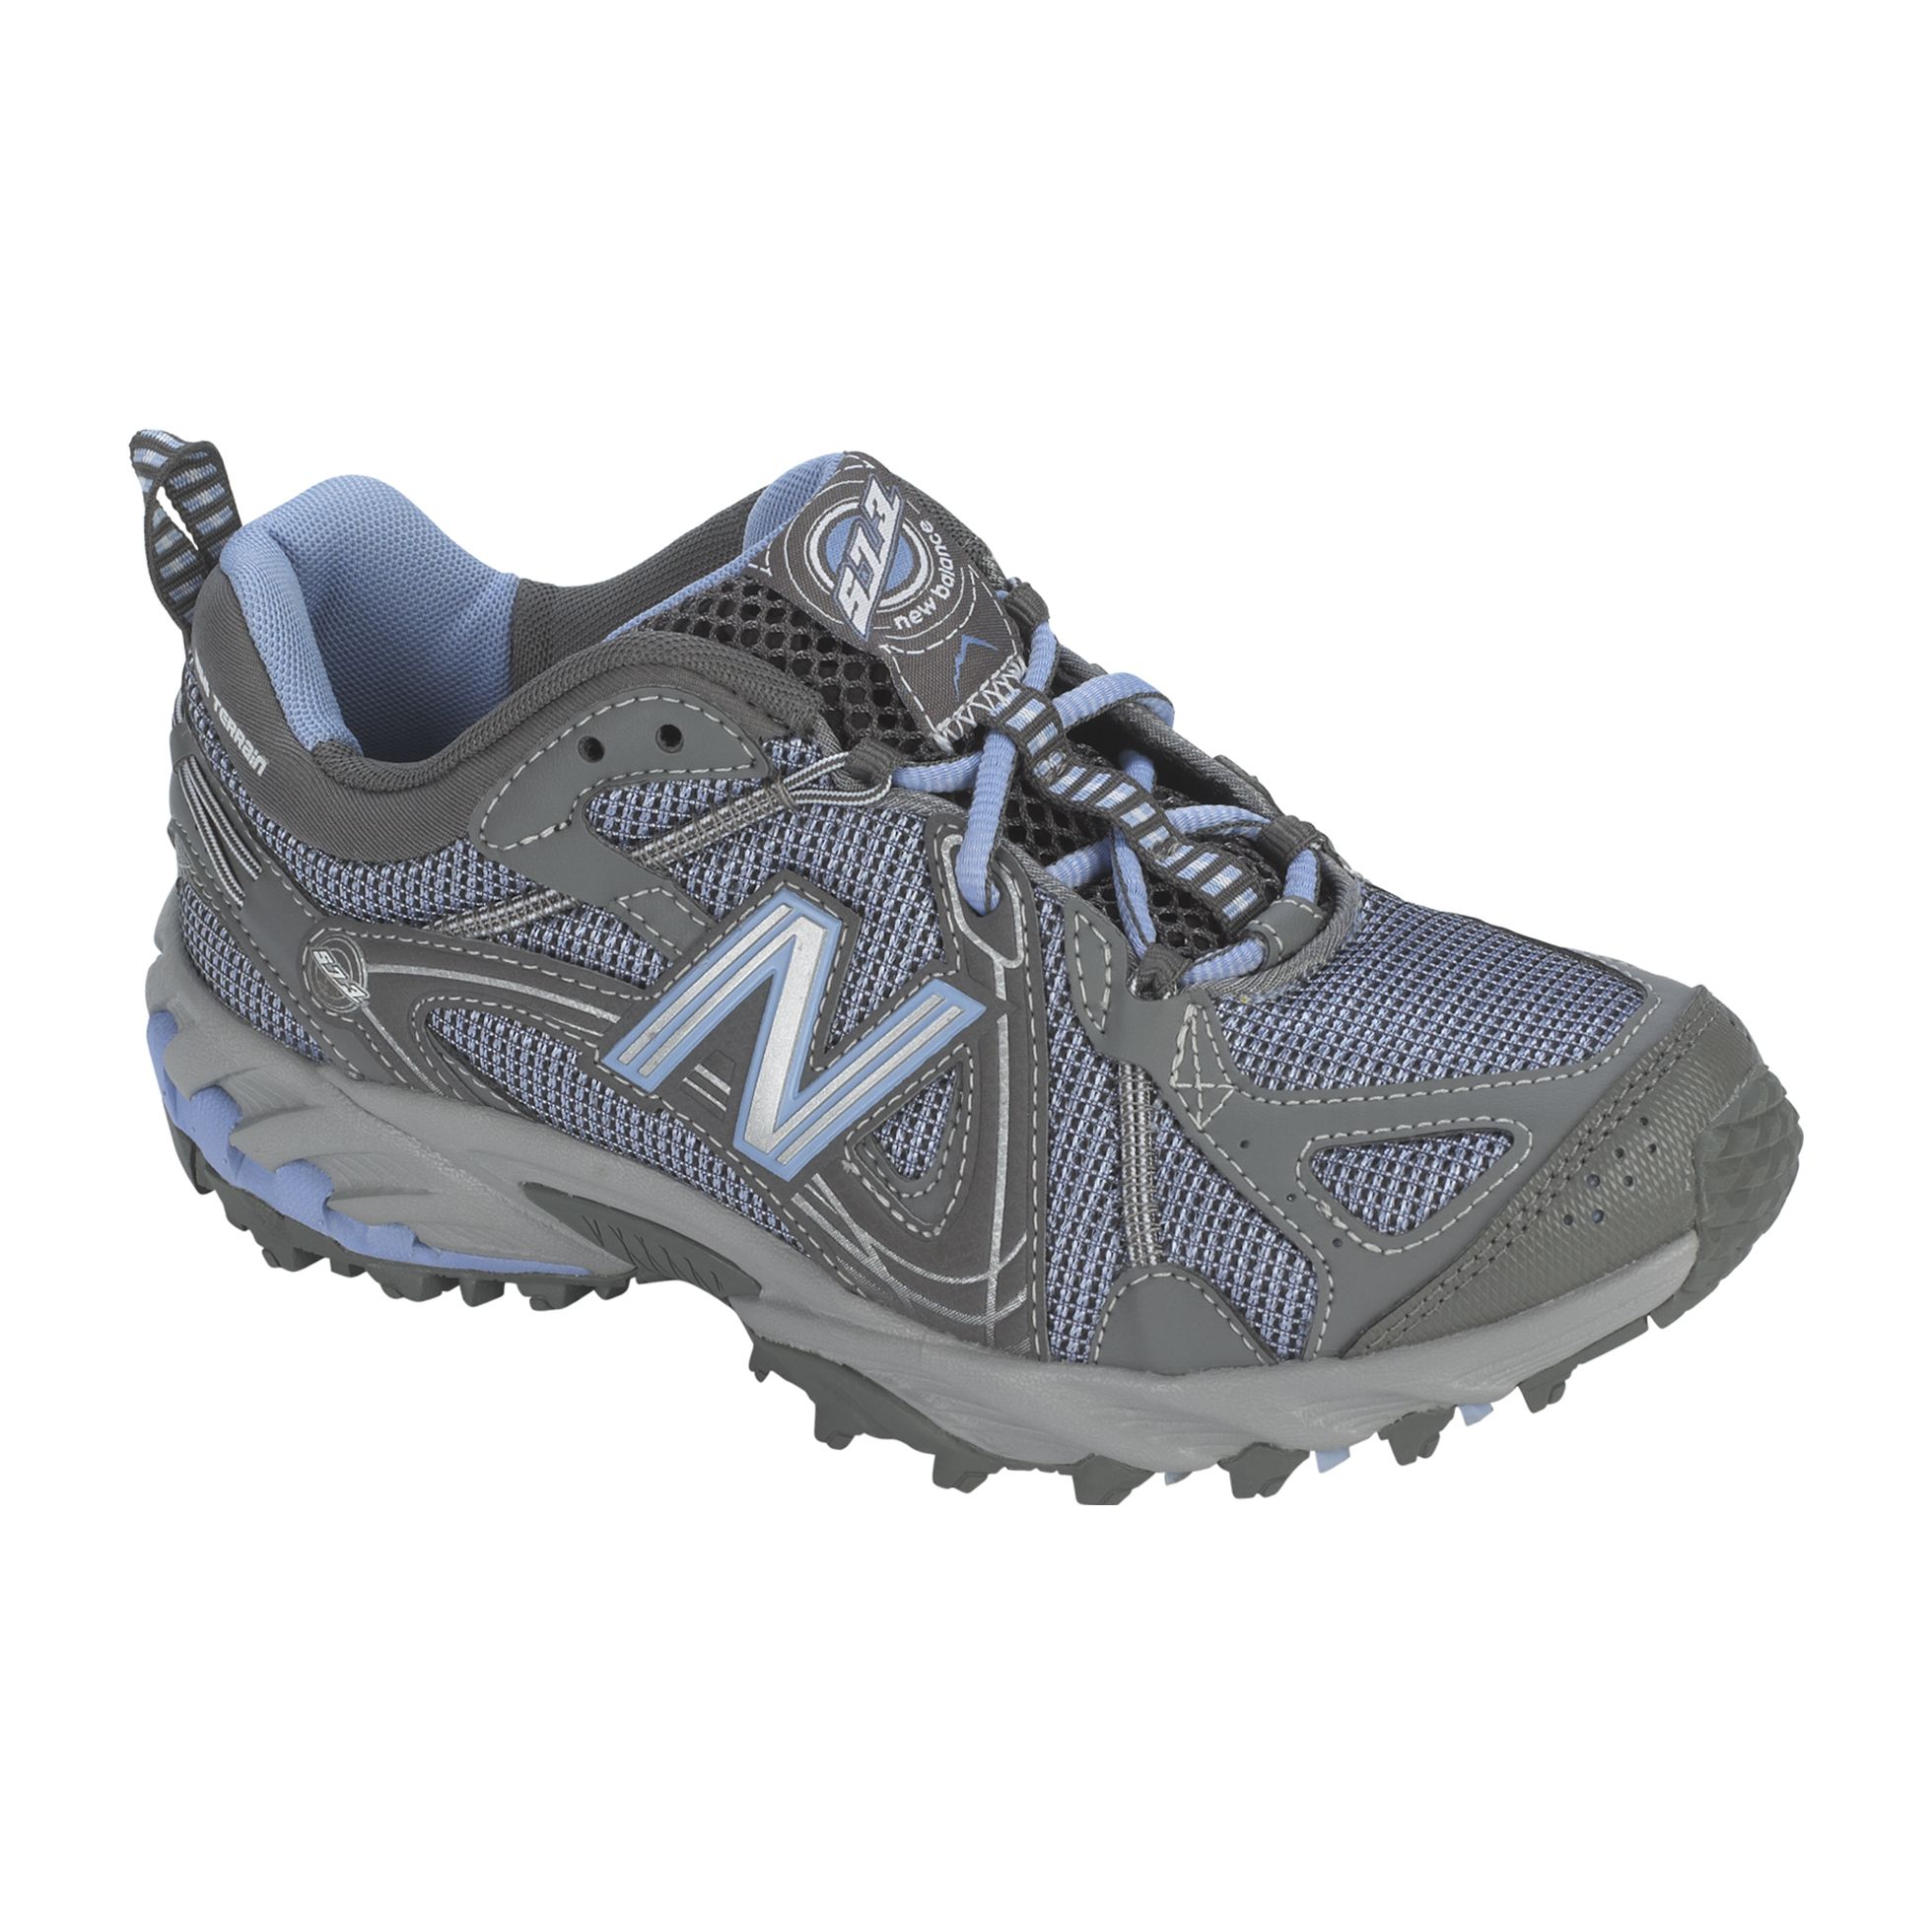 New Balance Women's 573 Trail - Gray/Blue - Clothing, Shoes ...